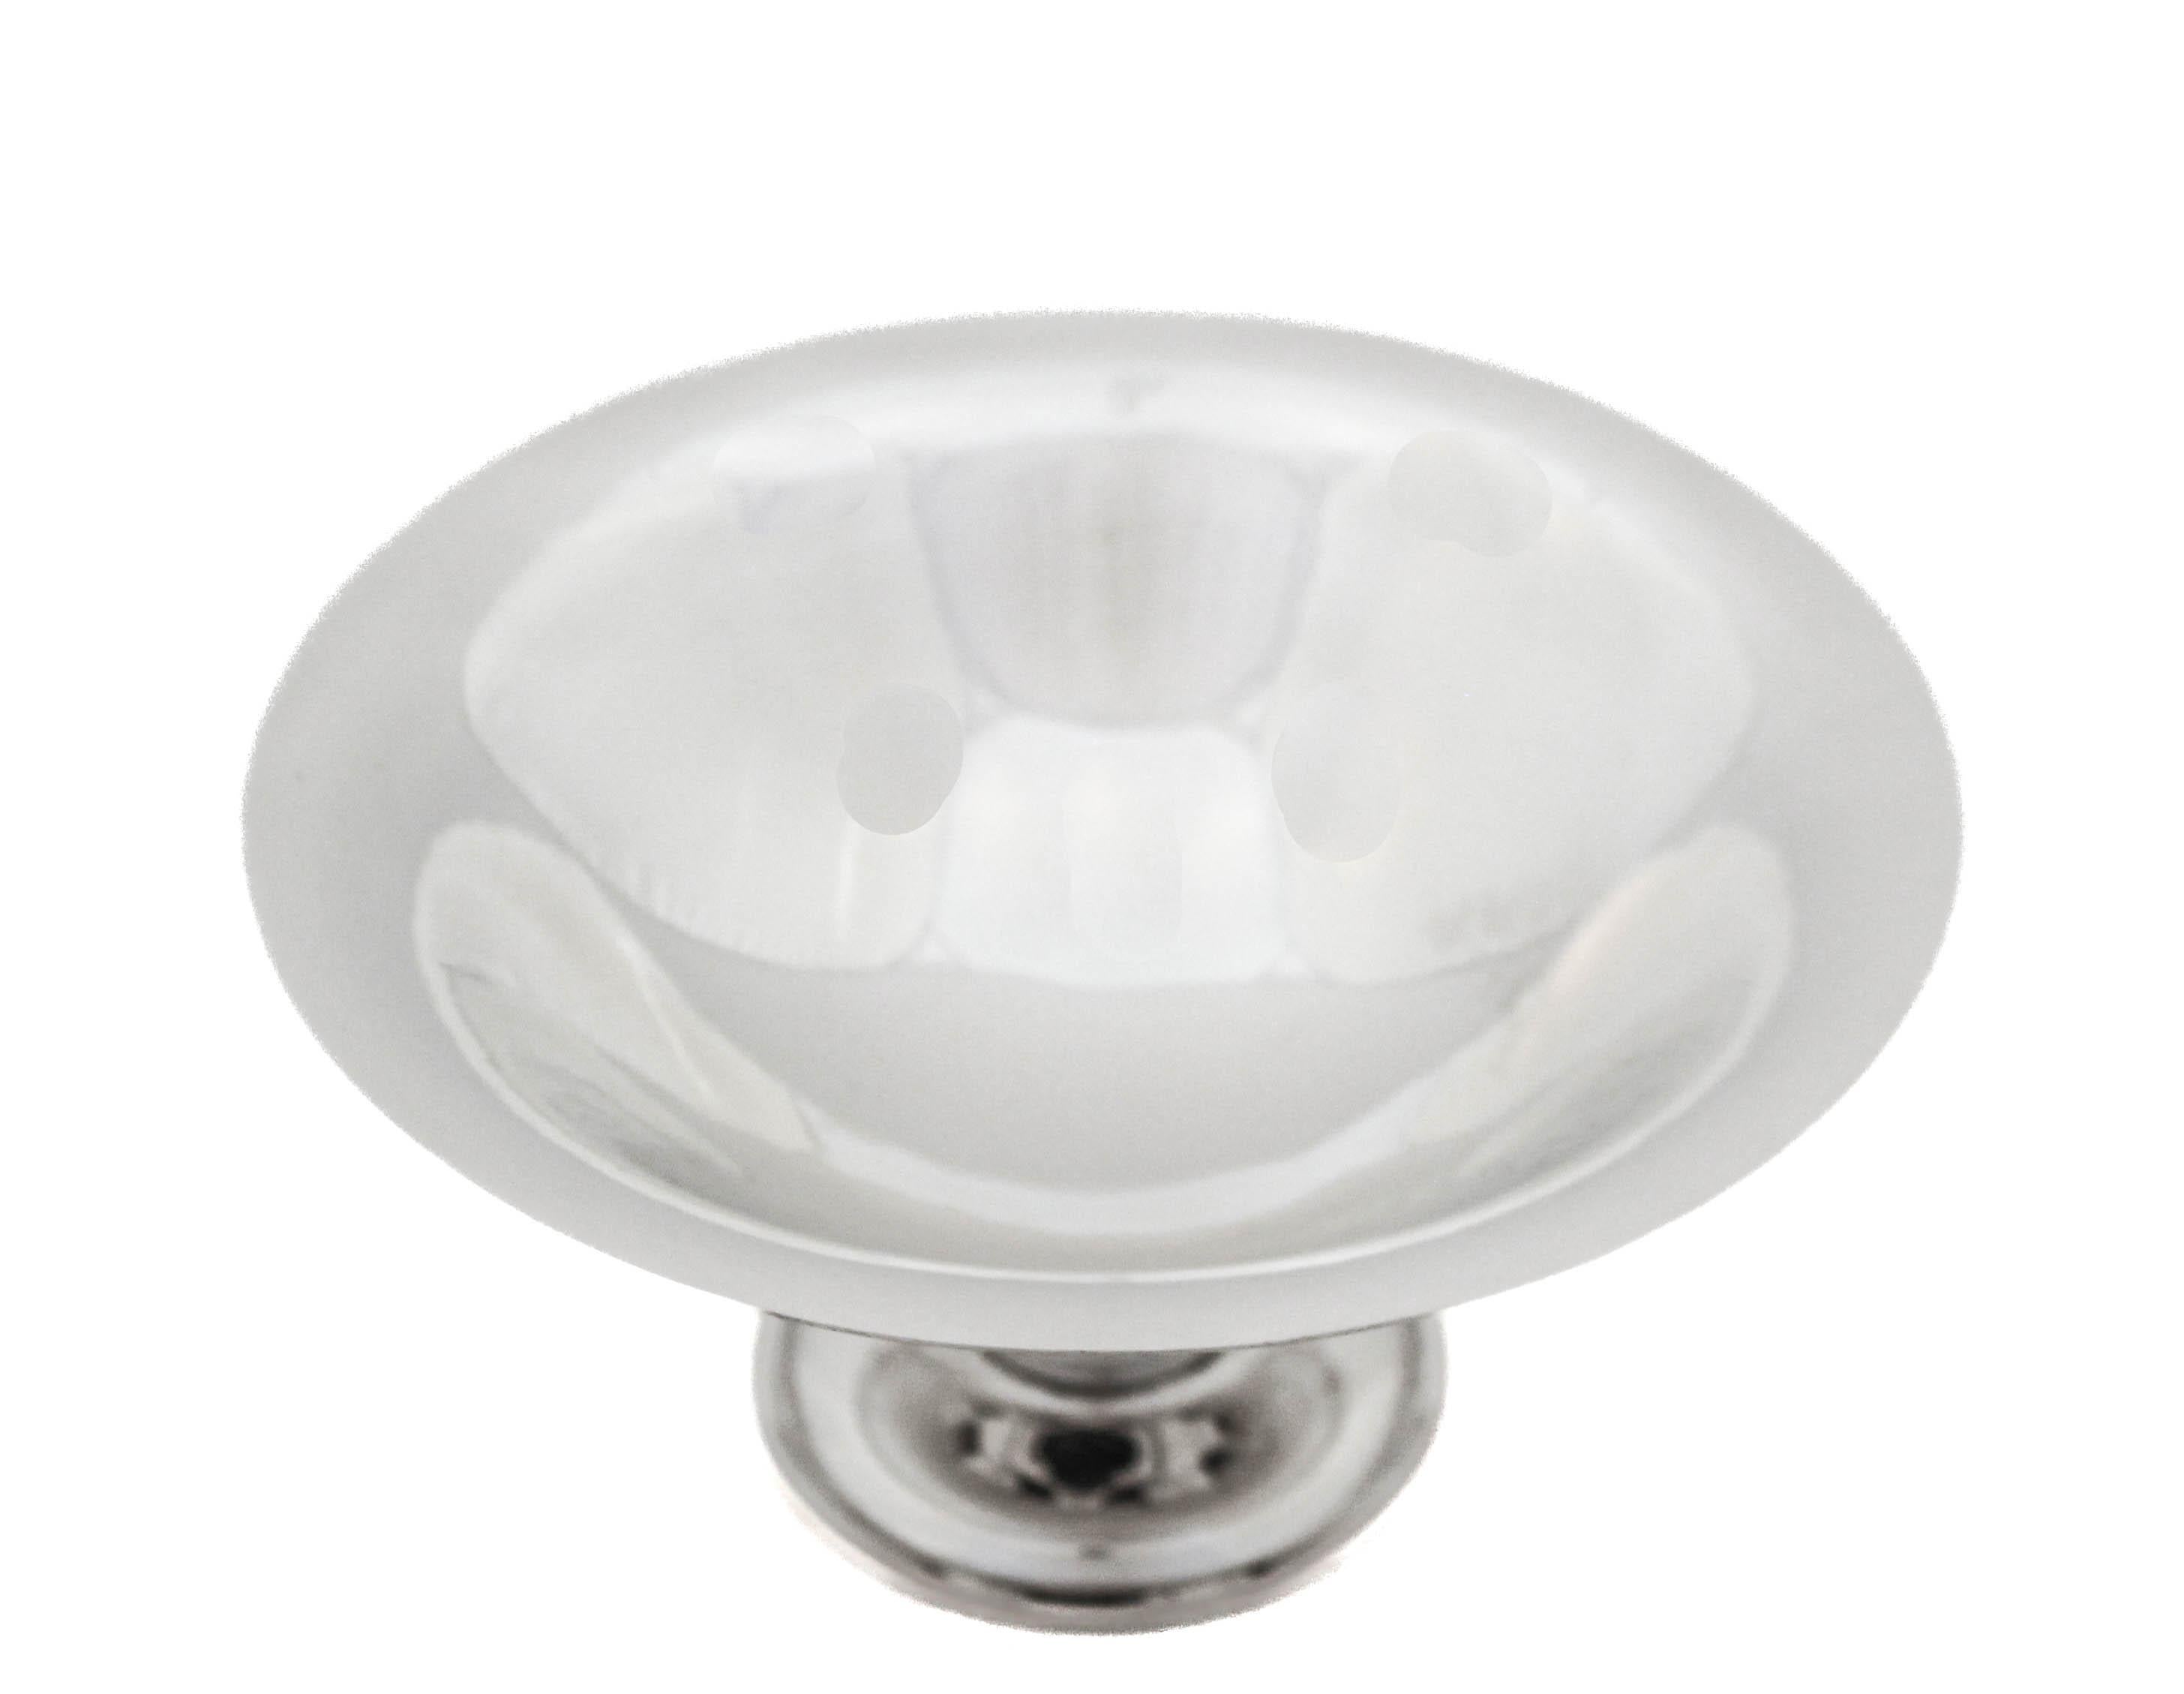 Being offered is a pair of sterling silver compotes made in Denmark.  They are lightly hammered with a Jensen-esque style and design.  The pedestal is hollow and has a Mid-Century style that connects the base and top.  Perfect for your coffee table